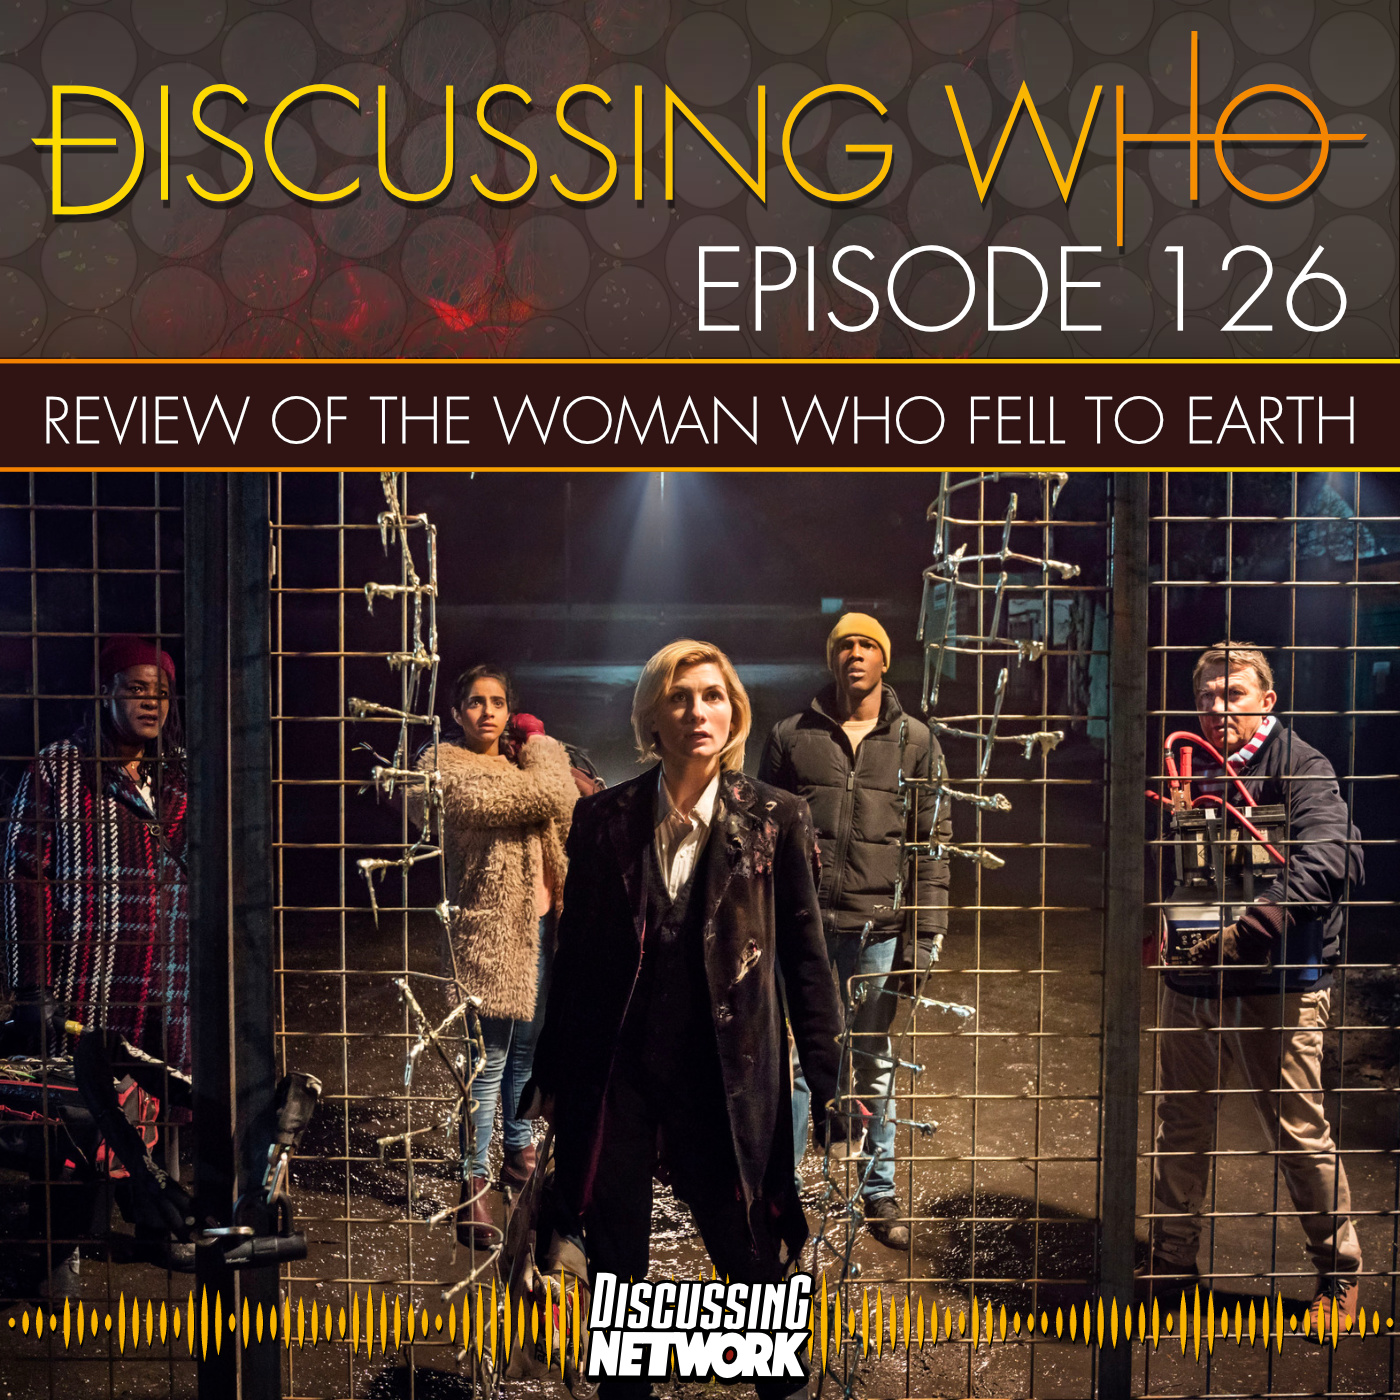 The Woman Who Fell to Earth, Doctor Who Series 11 Episode 1